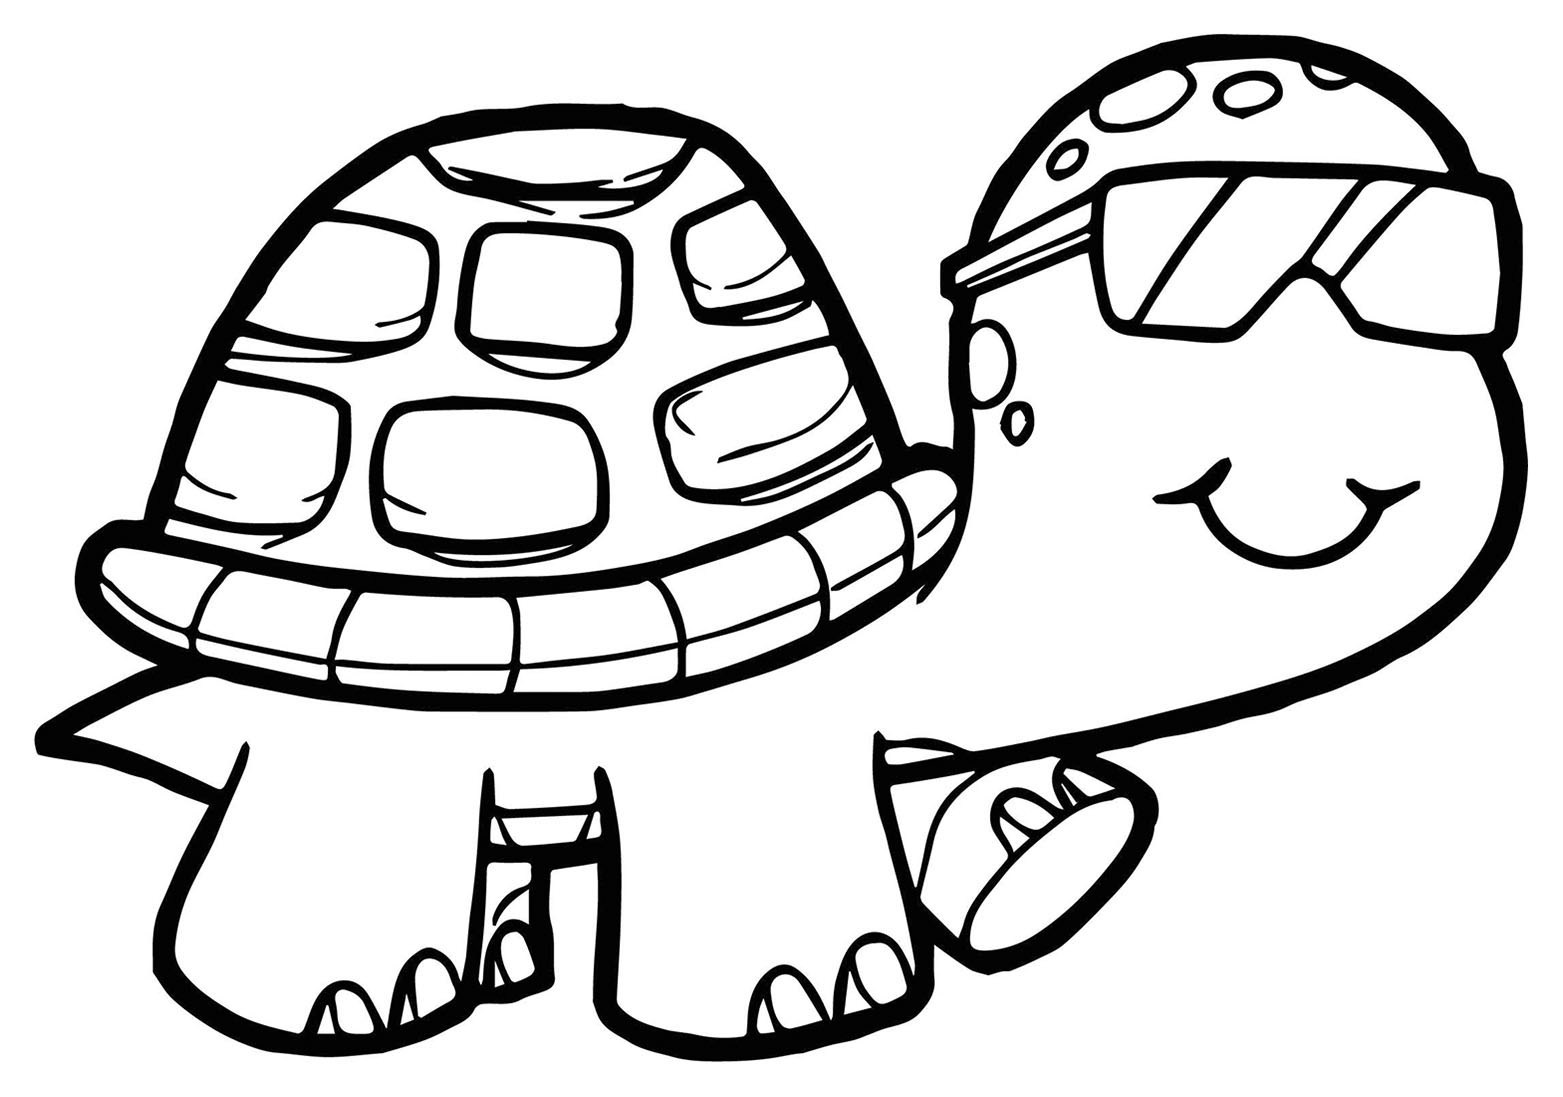 Coloring pages staggering coloring sheets for kids turtles to print free pages children